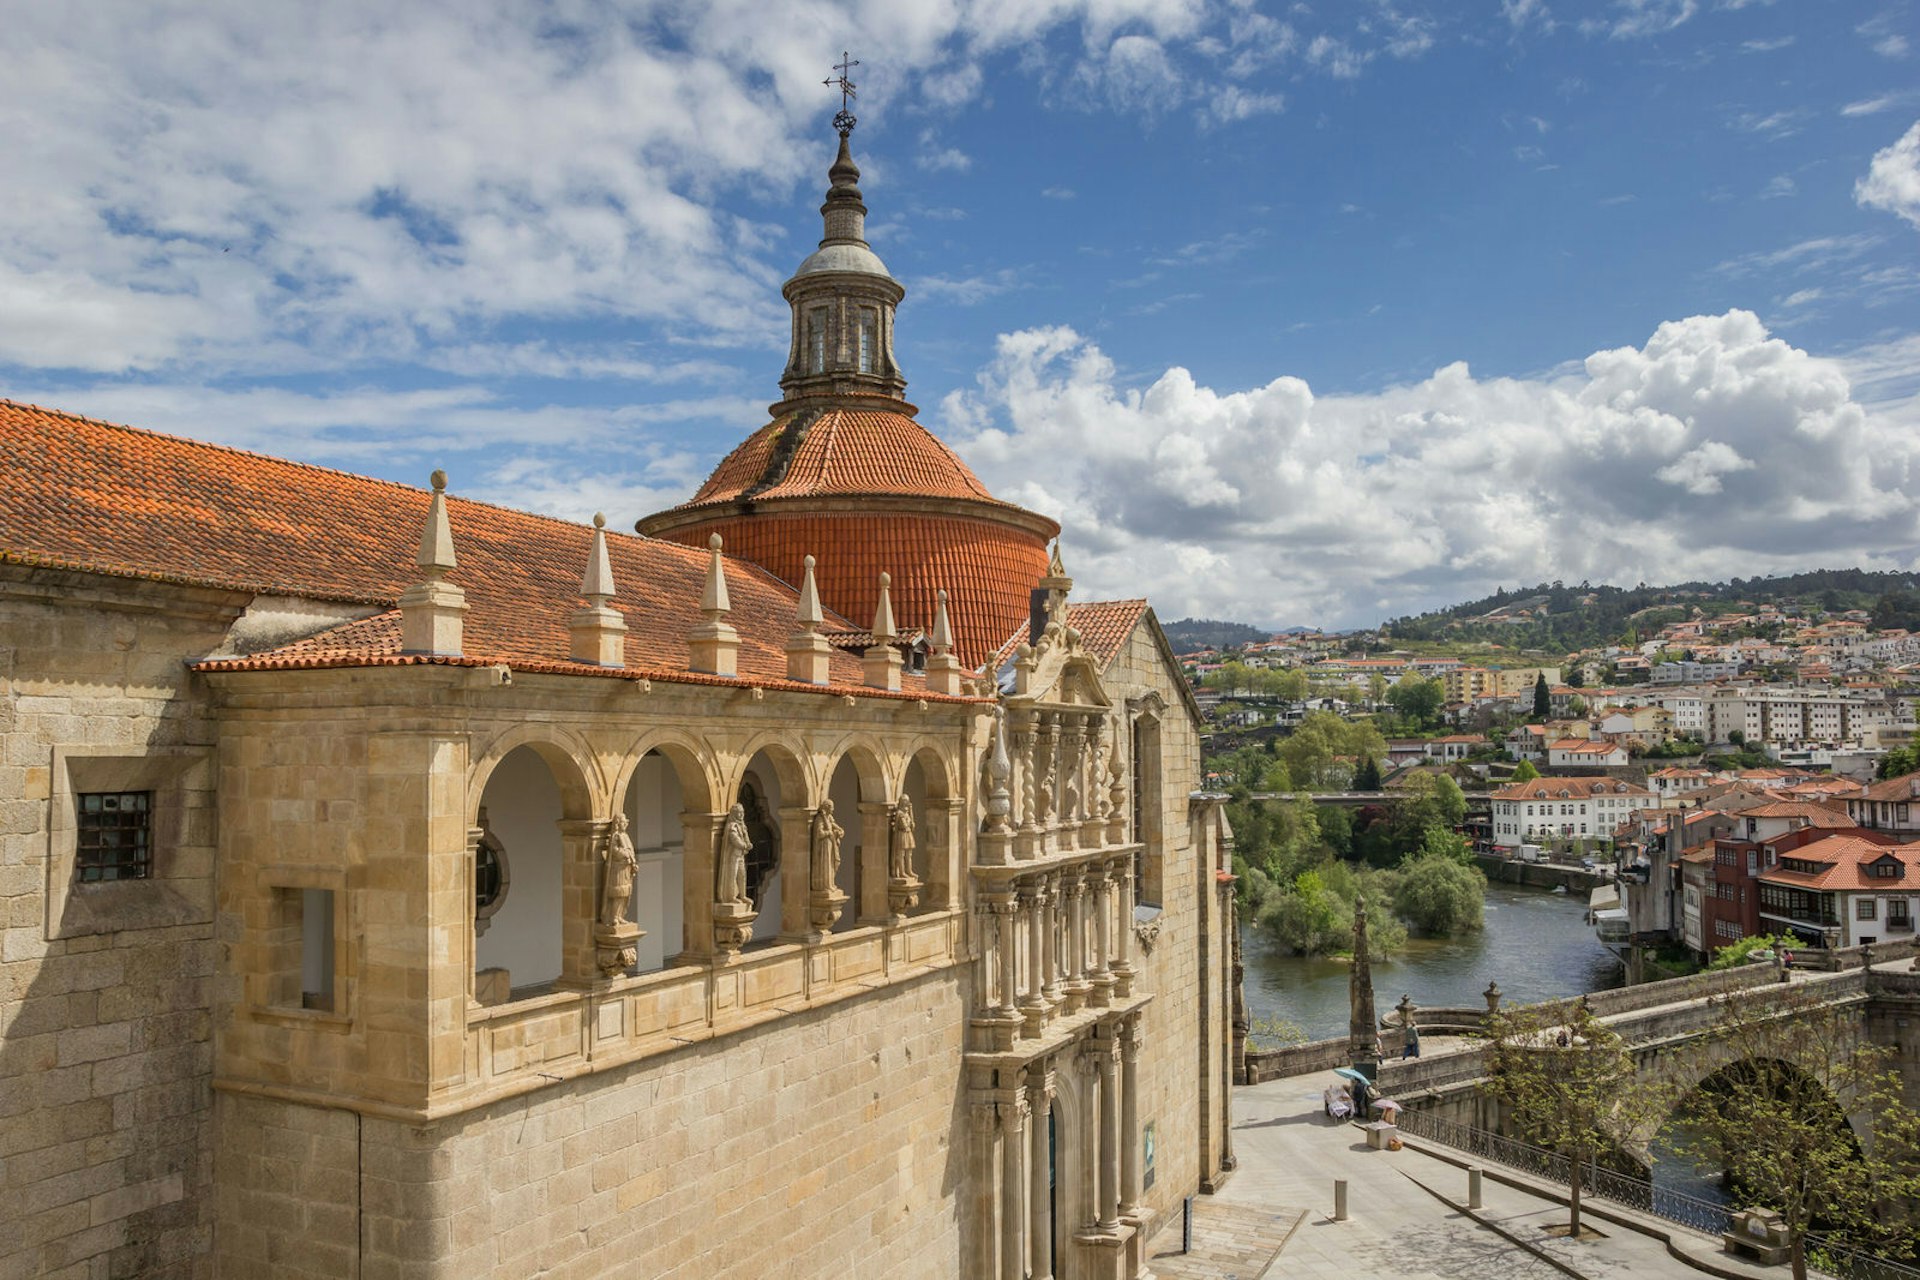 A beautiful stone church, with arched porticoes, a terracotta roof and spire, stands above the pedestrian street; in front of the church, the arched Ponte de São Gonçalo crosses the Tâmega River.